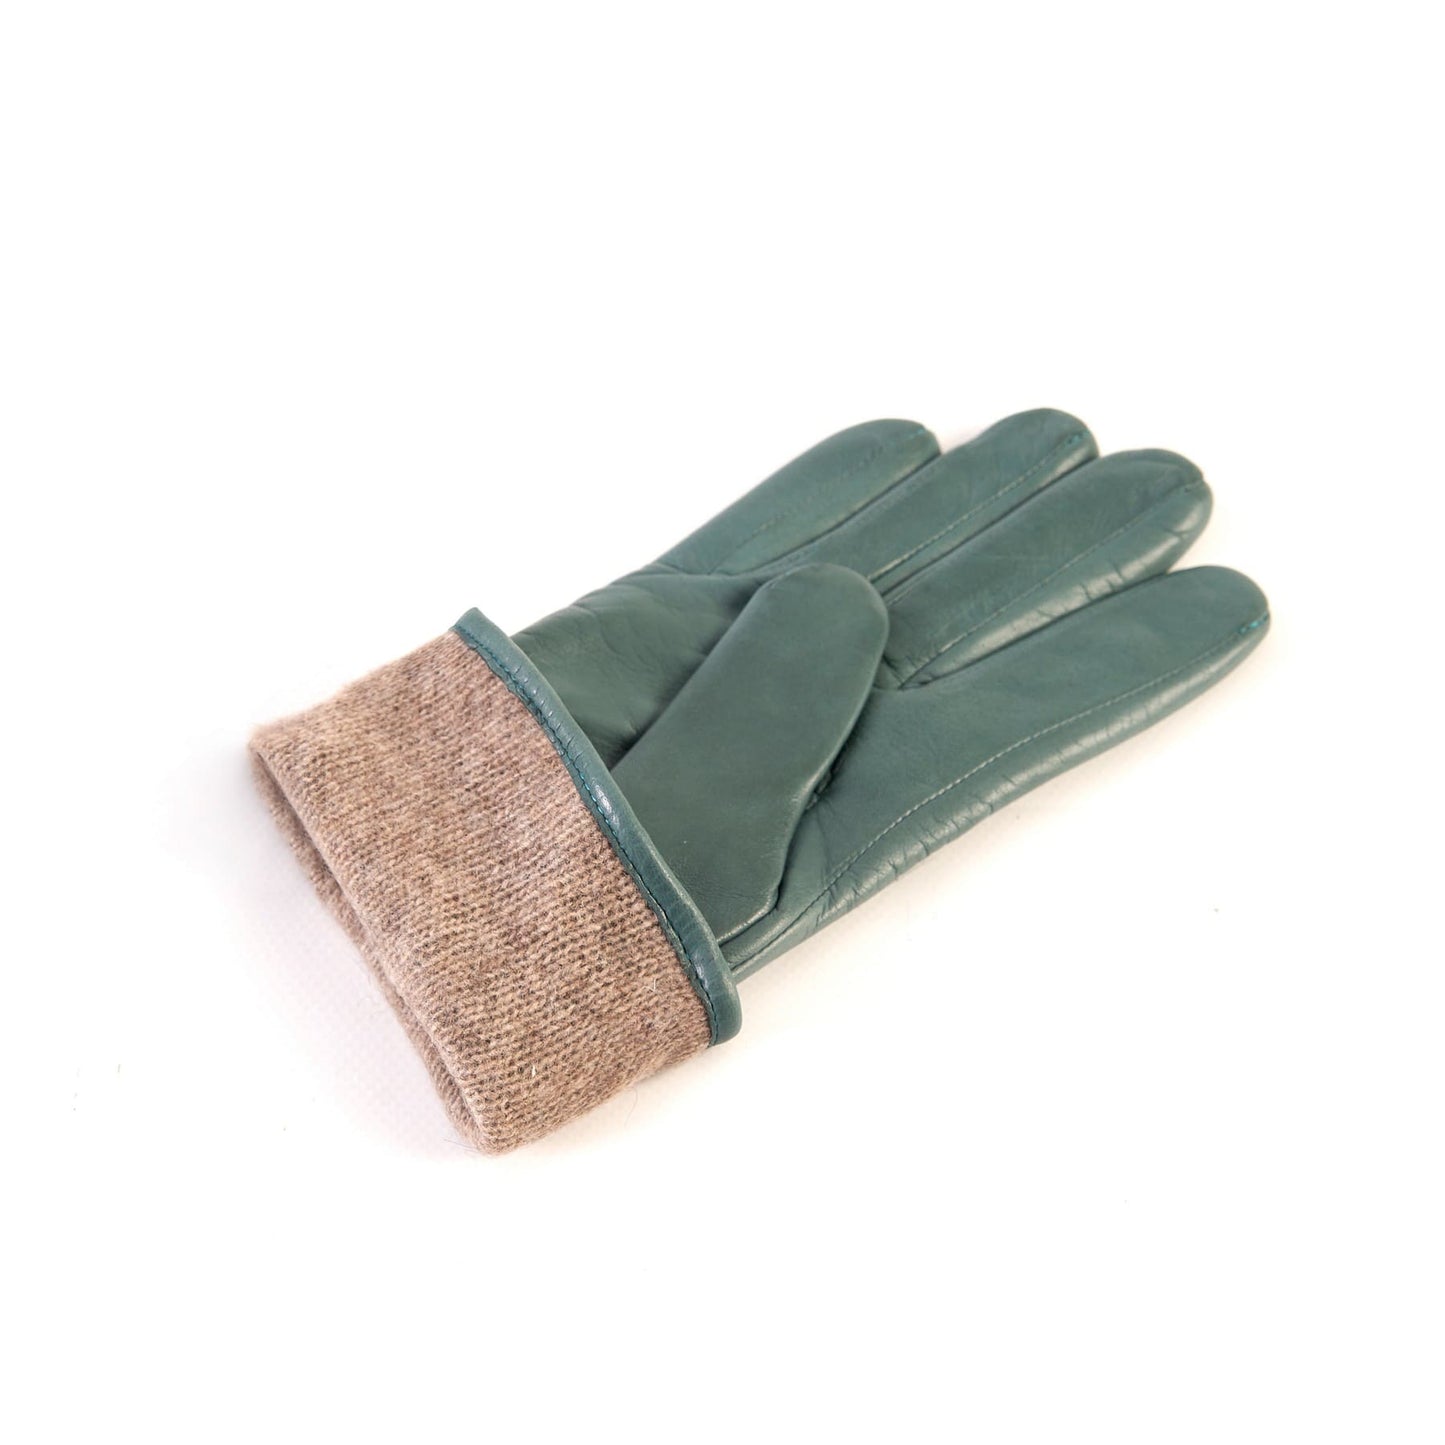 Women's green nappa leather gloves with suede panel insert on top cashmere lined